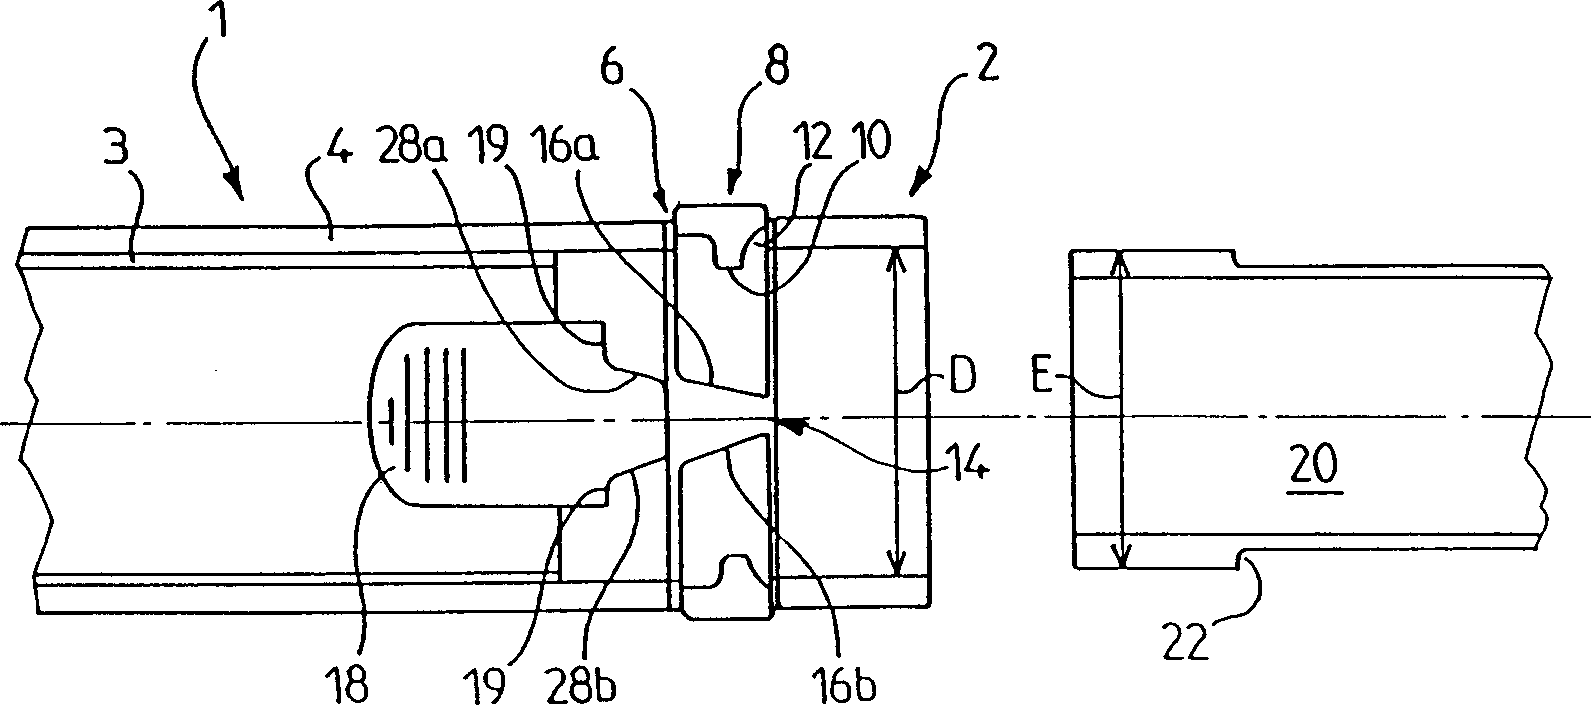 Pneuamtic suction pipe connector for refuse recovering apparatus